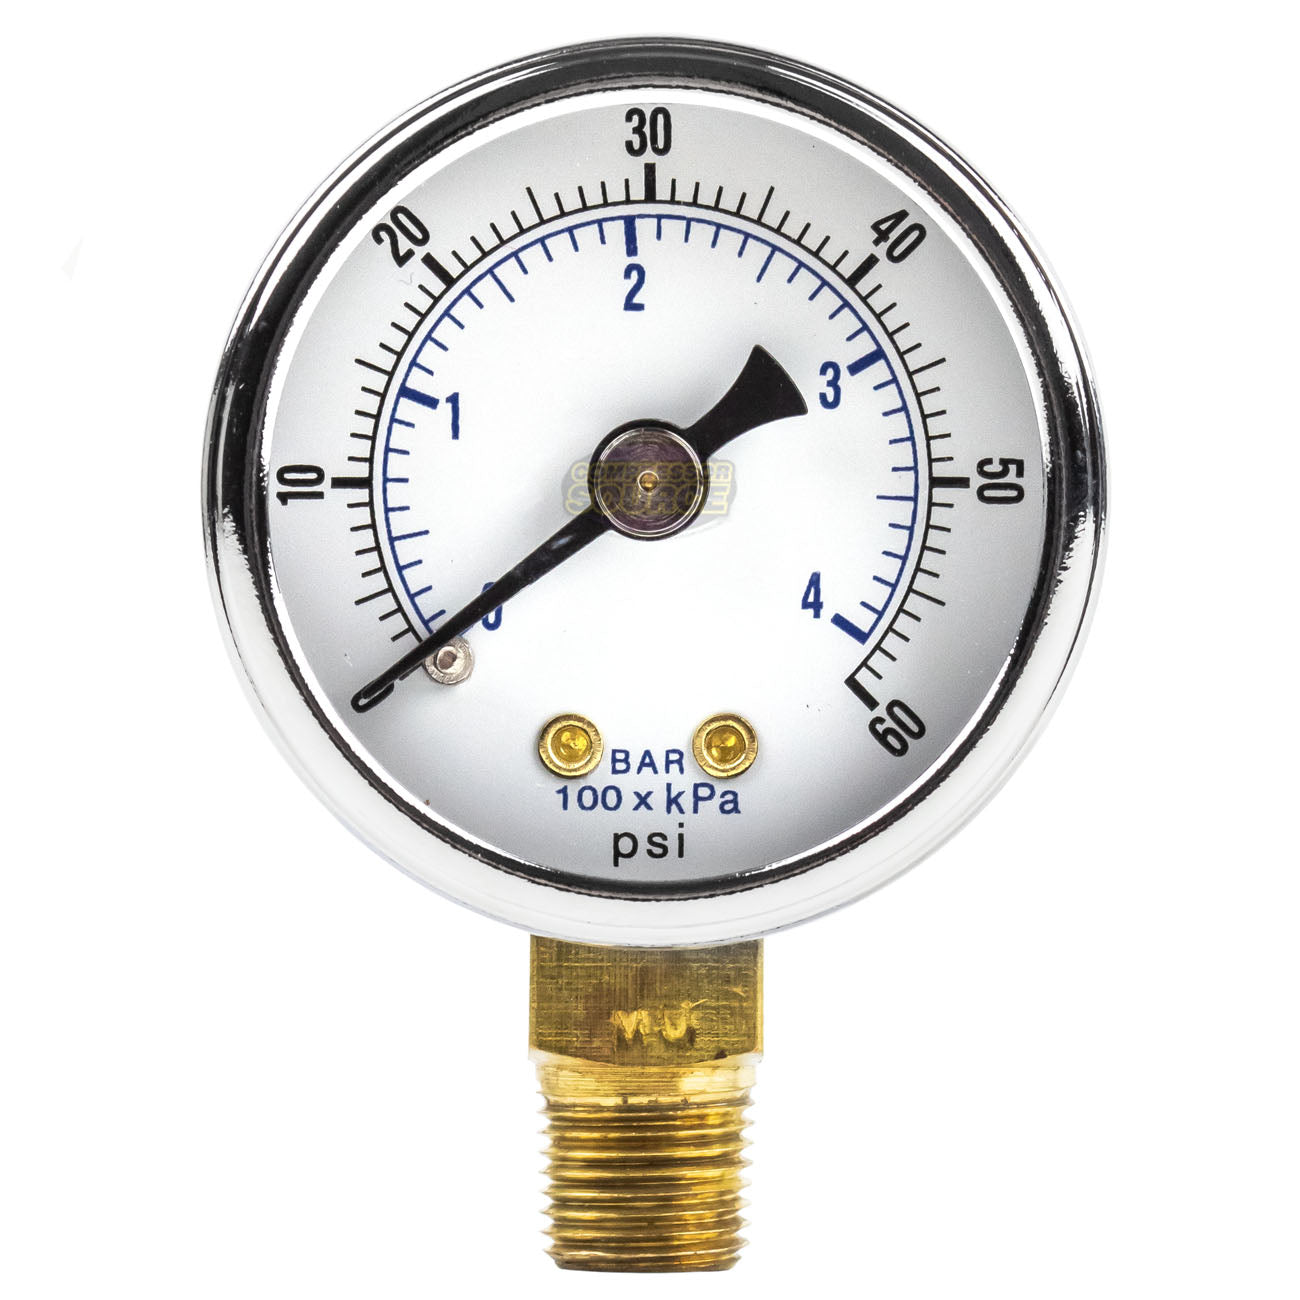 1/8" NPT 0-60 PSI Air Compressor / Hydraulic Pressure Gauge Lower Side Mount With 1.5" Face